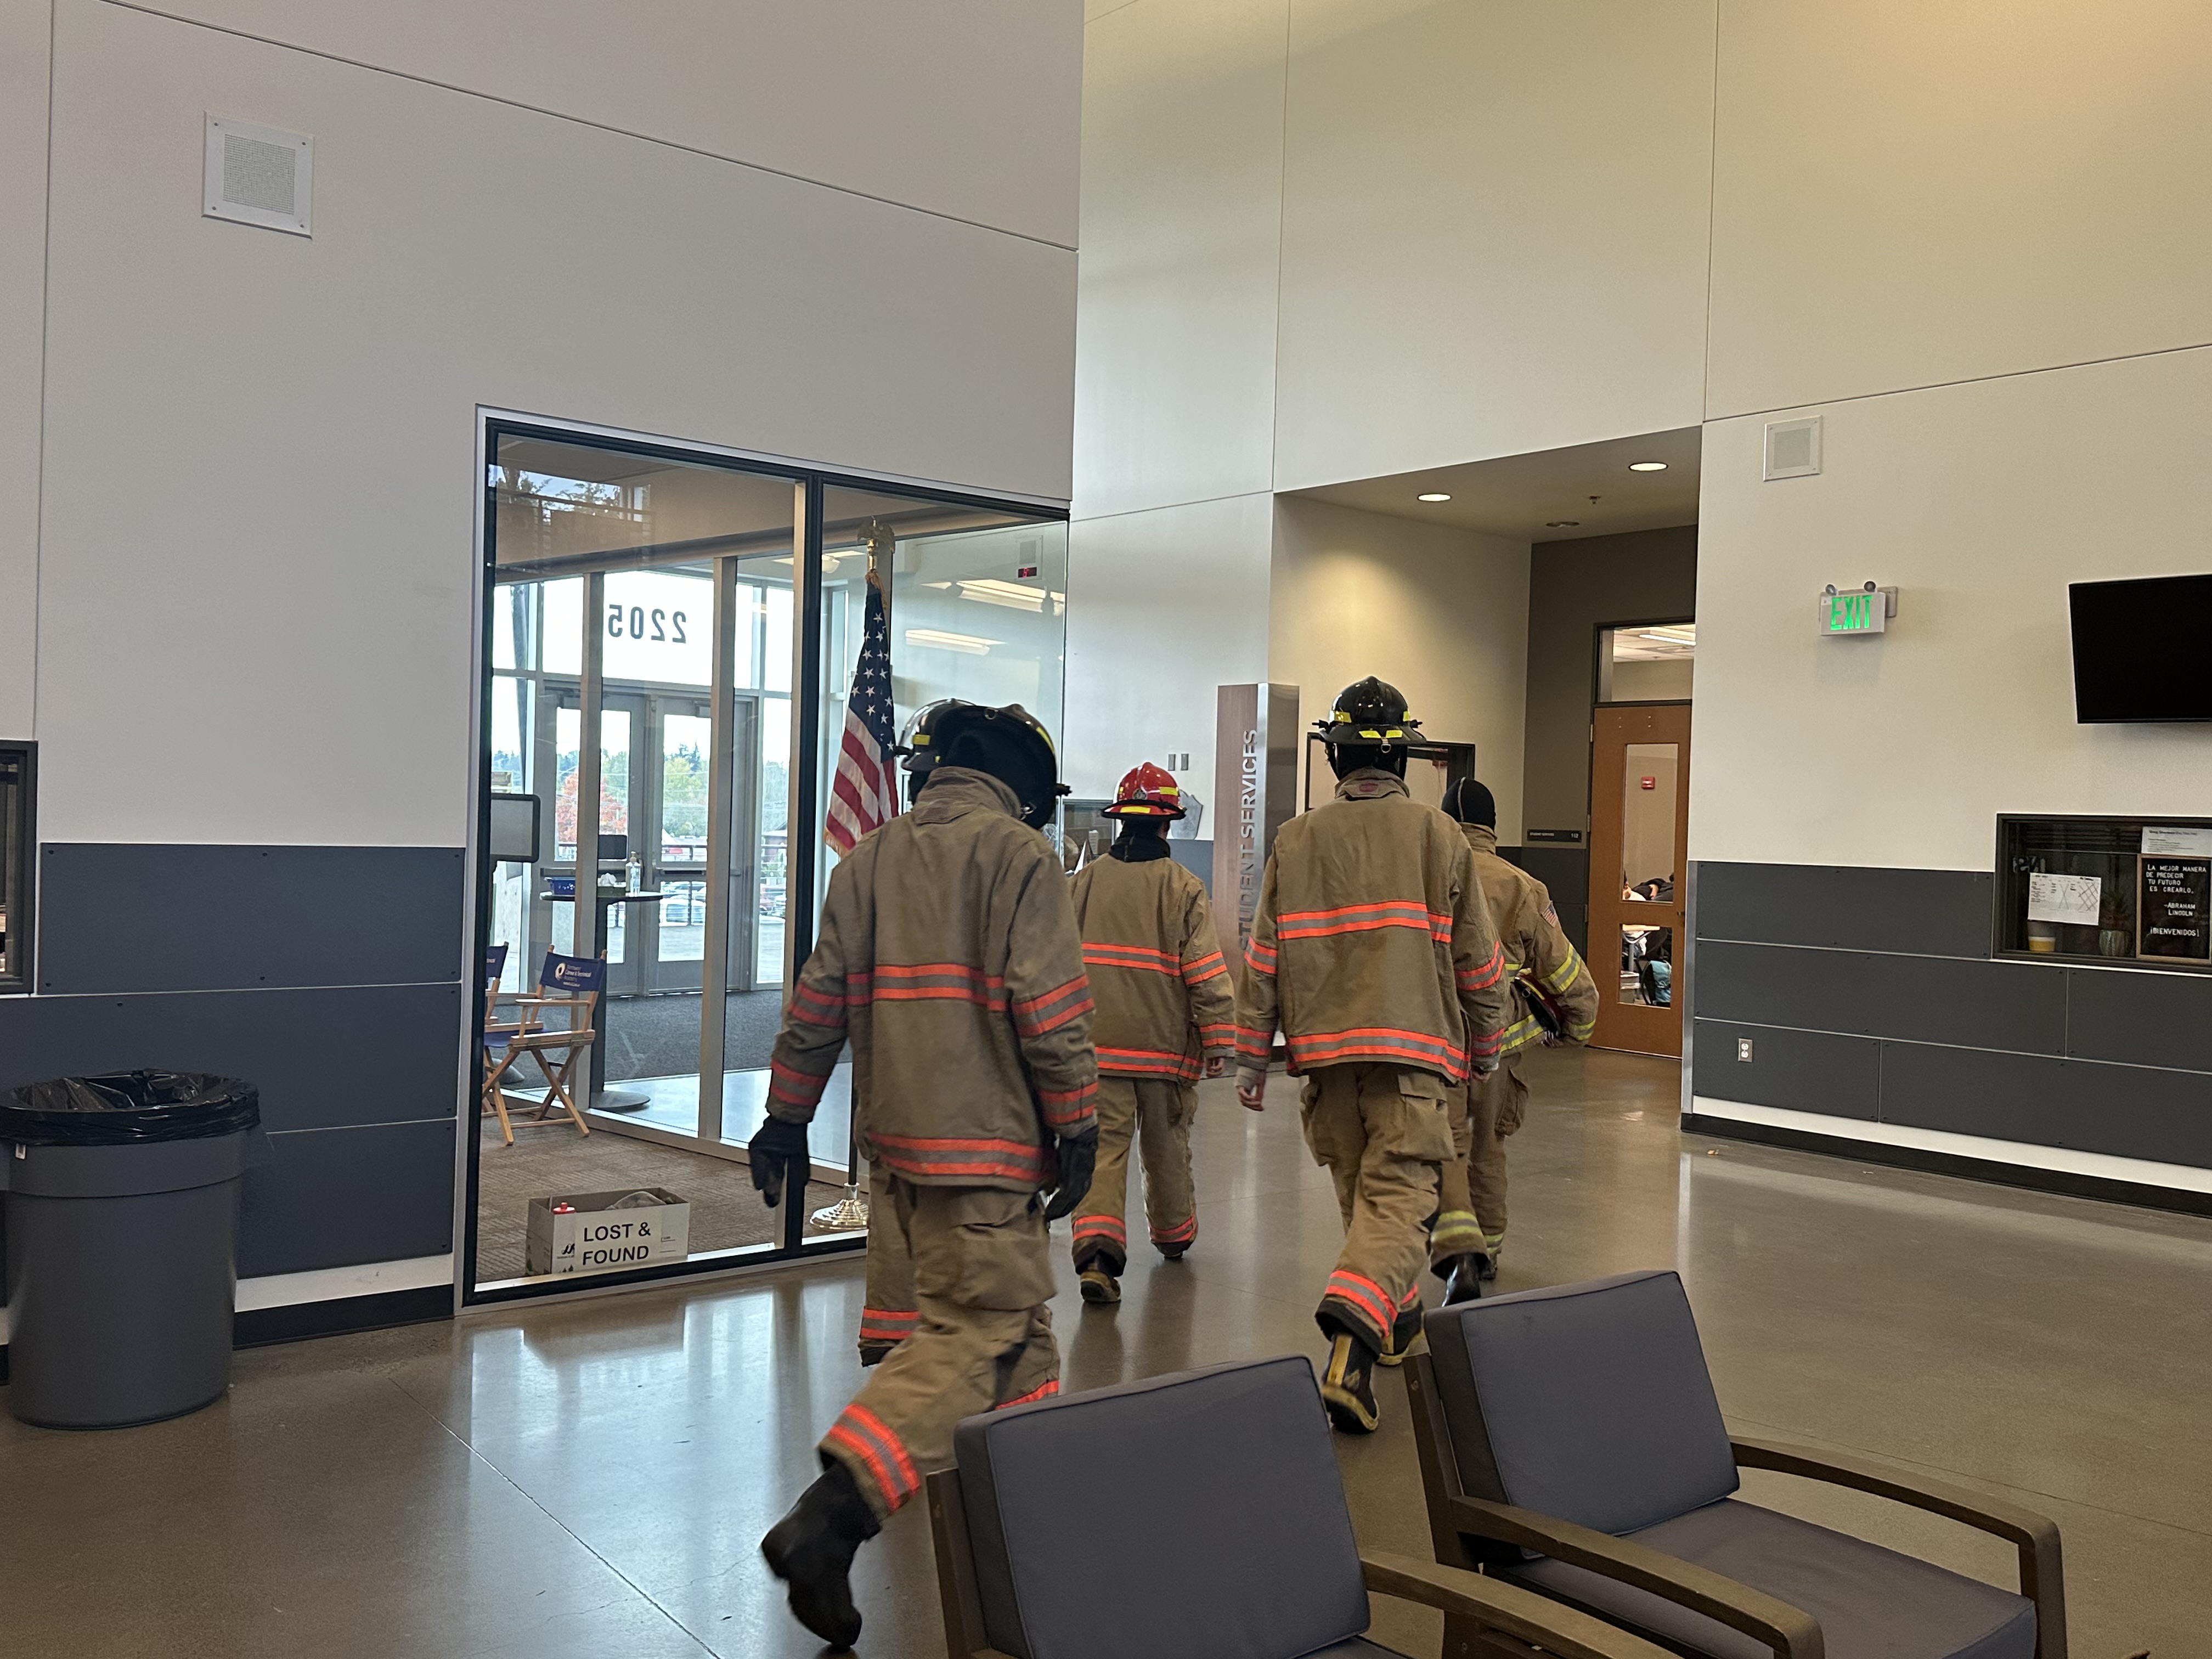 Students in firefighter attire